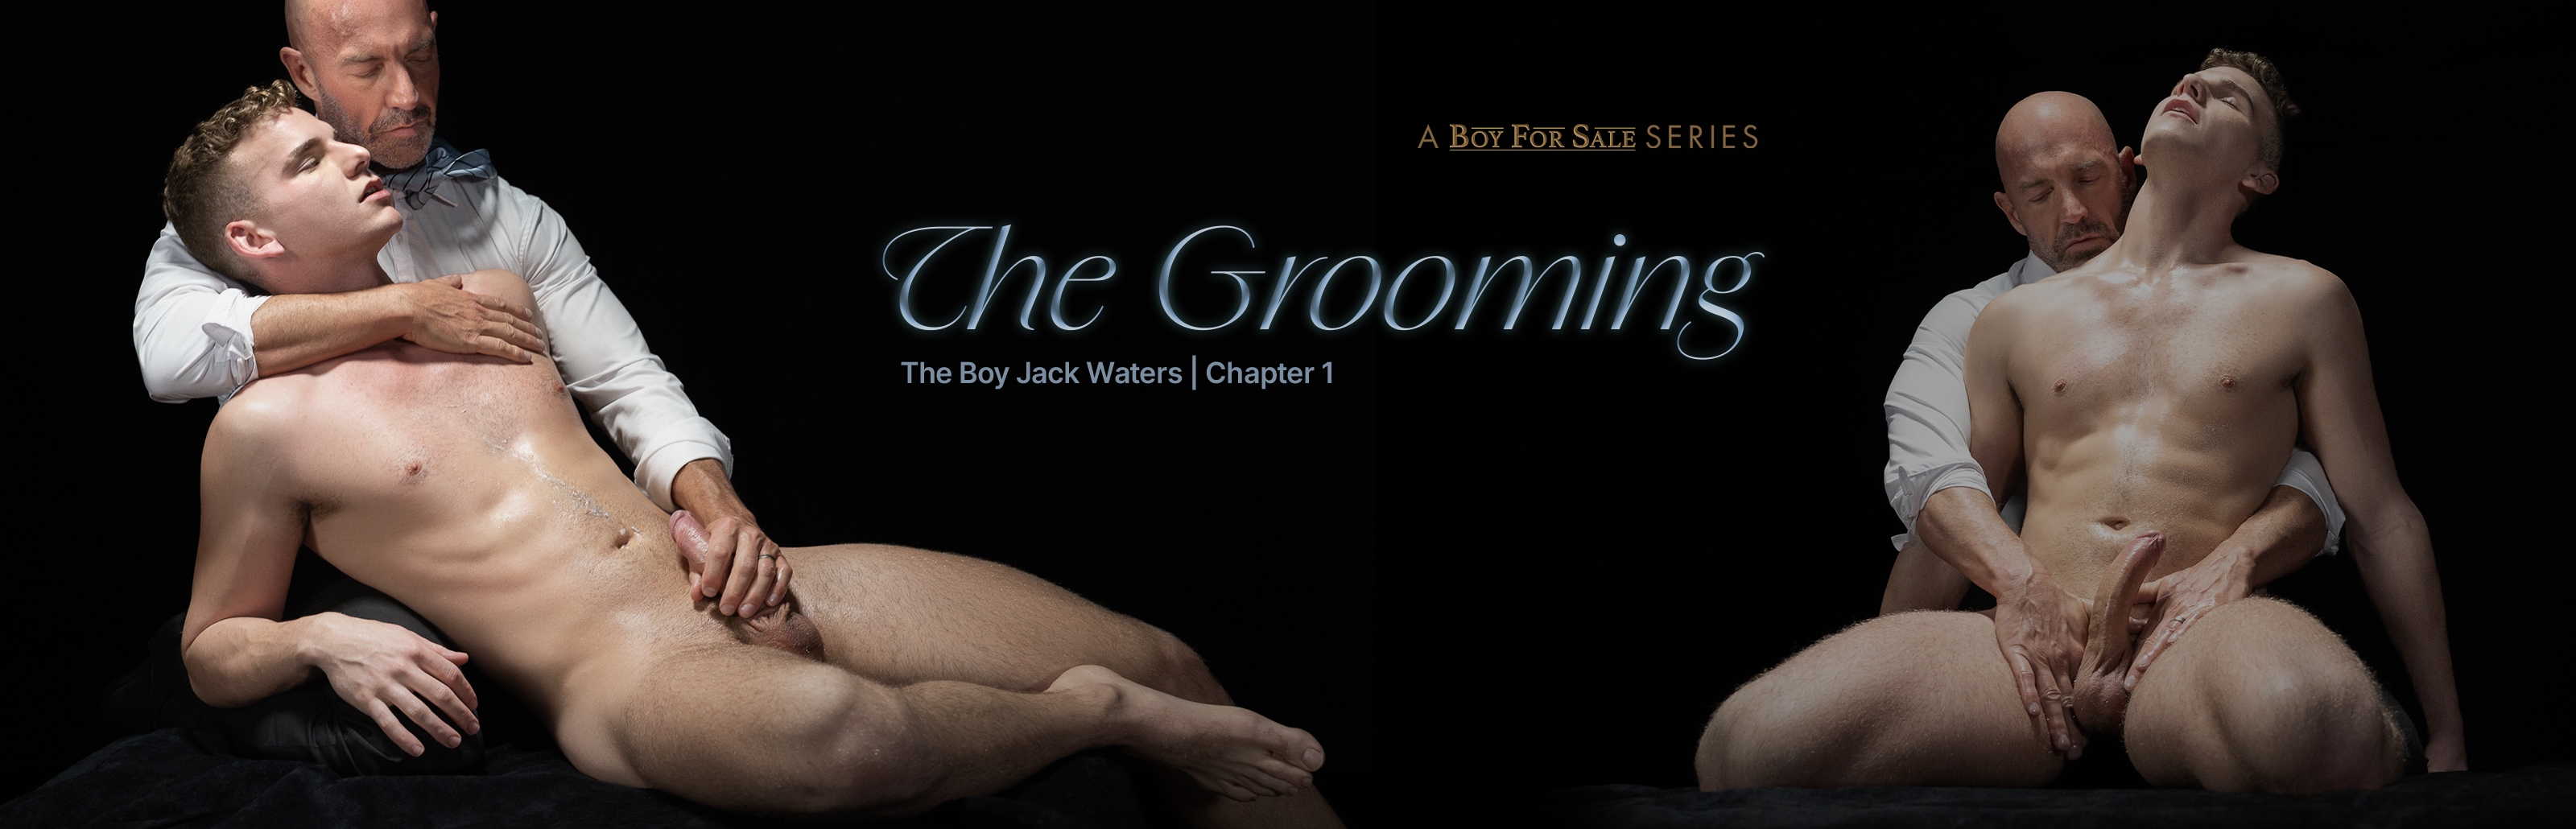 The Grooming | THE BOY JACK WATERS | Chapter 1 Photos 97